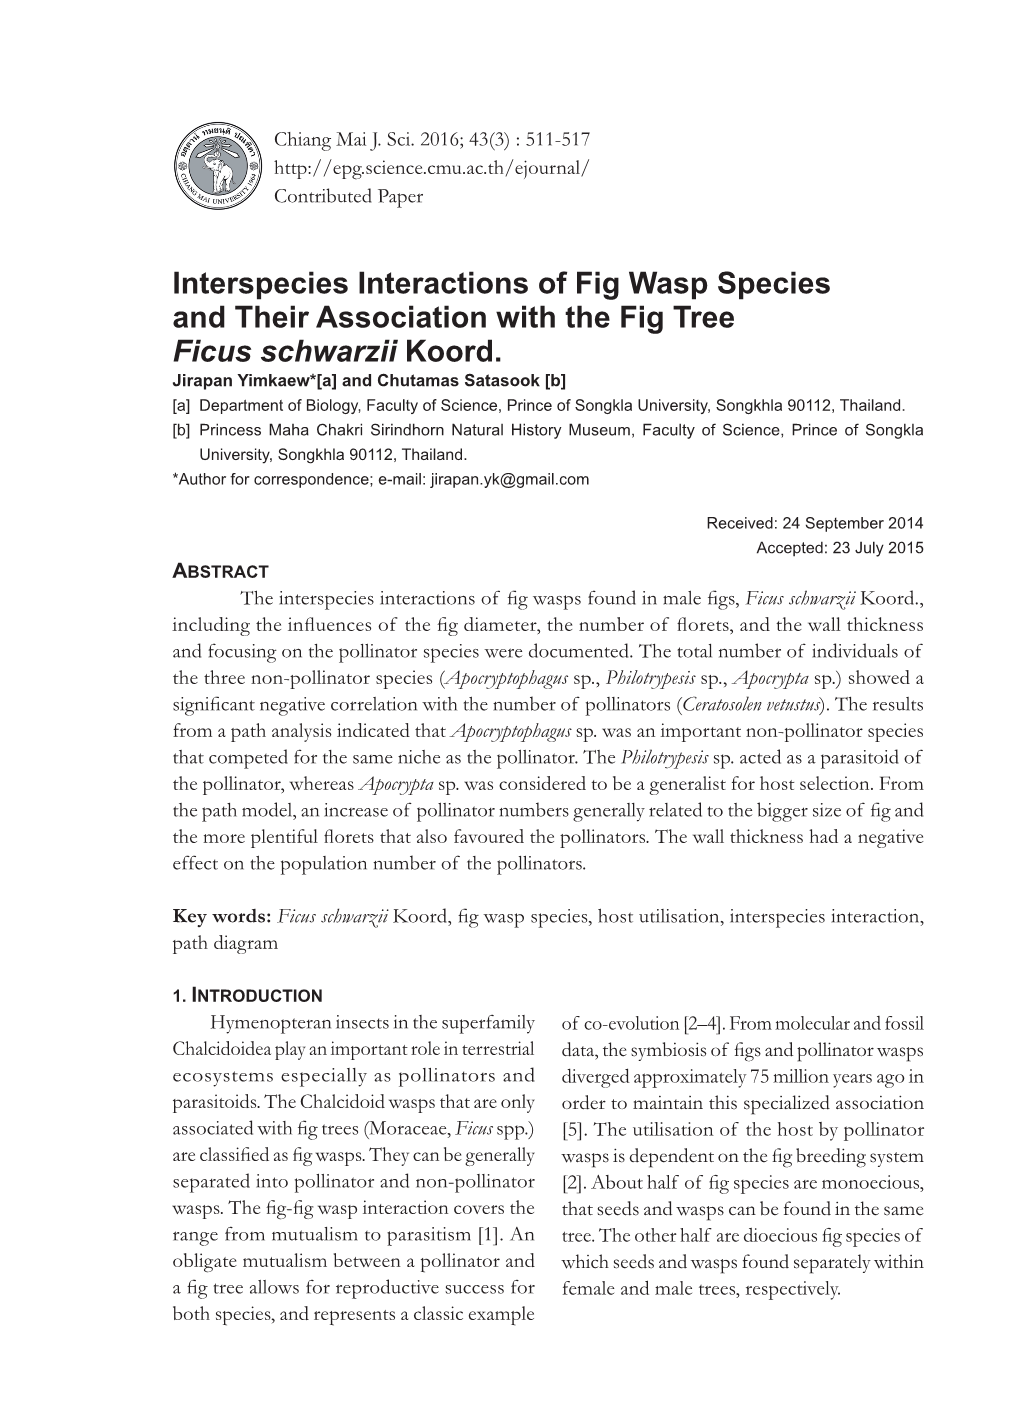 Interspecies Interactions of Fig Wasp Species and Their Association with the Fig Tree Ficus Schwarzii Koord